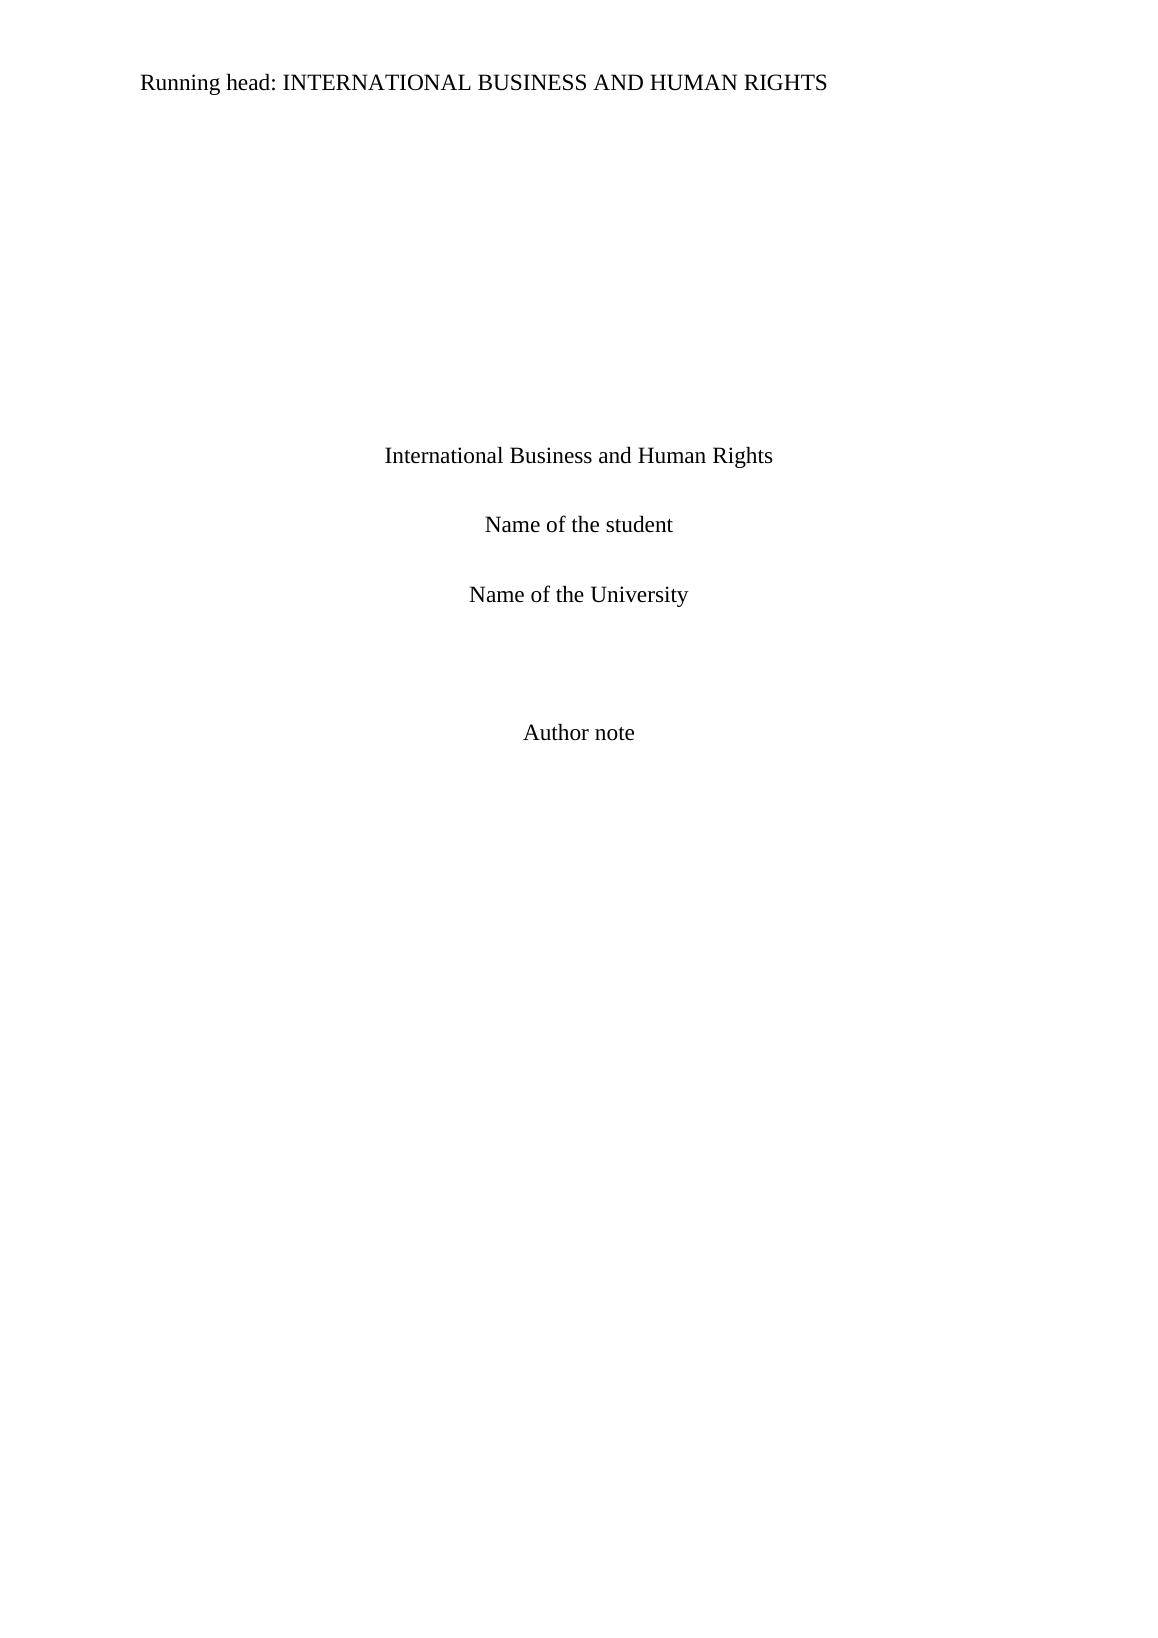 International Business and Human Rights_1